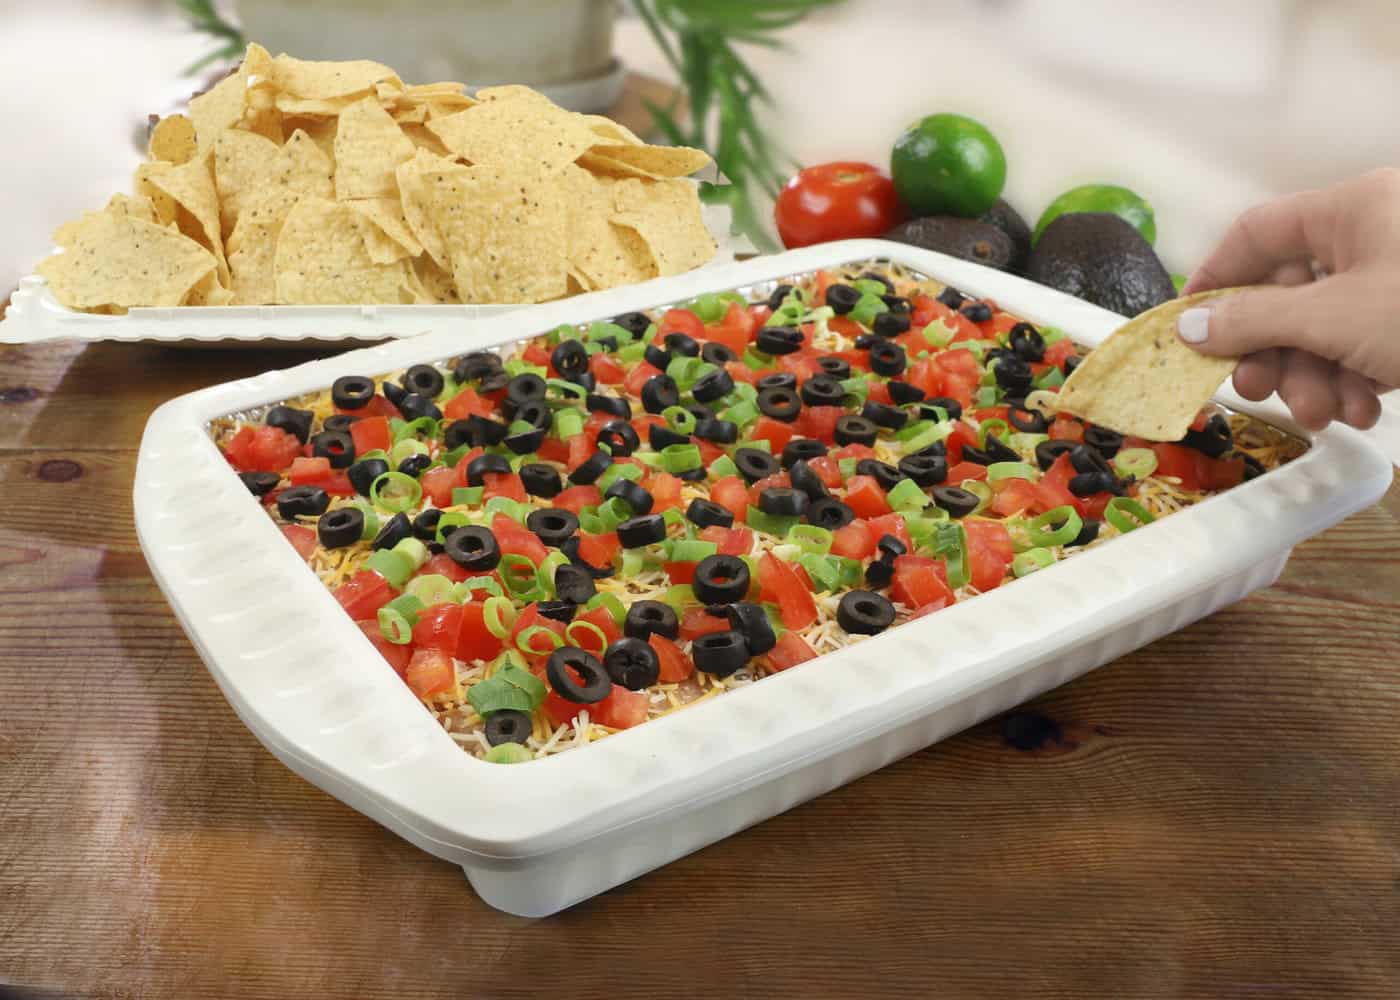 https://www.foildecor.com/wp-content/uploads/2019/11/FD-white-Taco-Dip-and-Chips-scaled.jpg